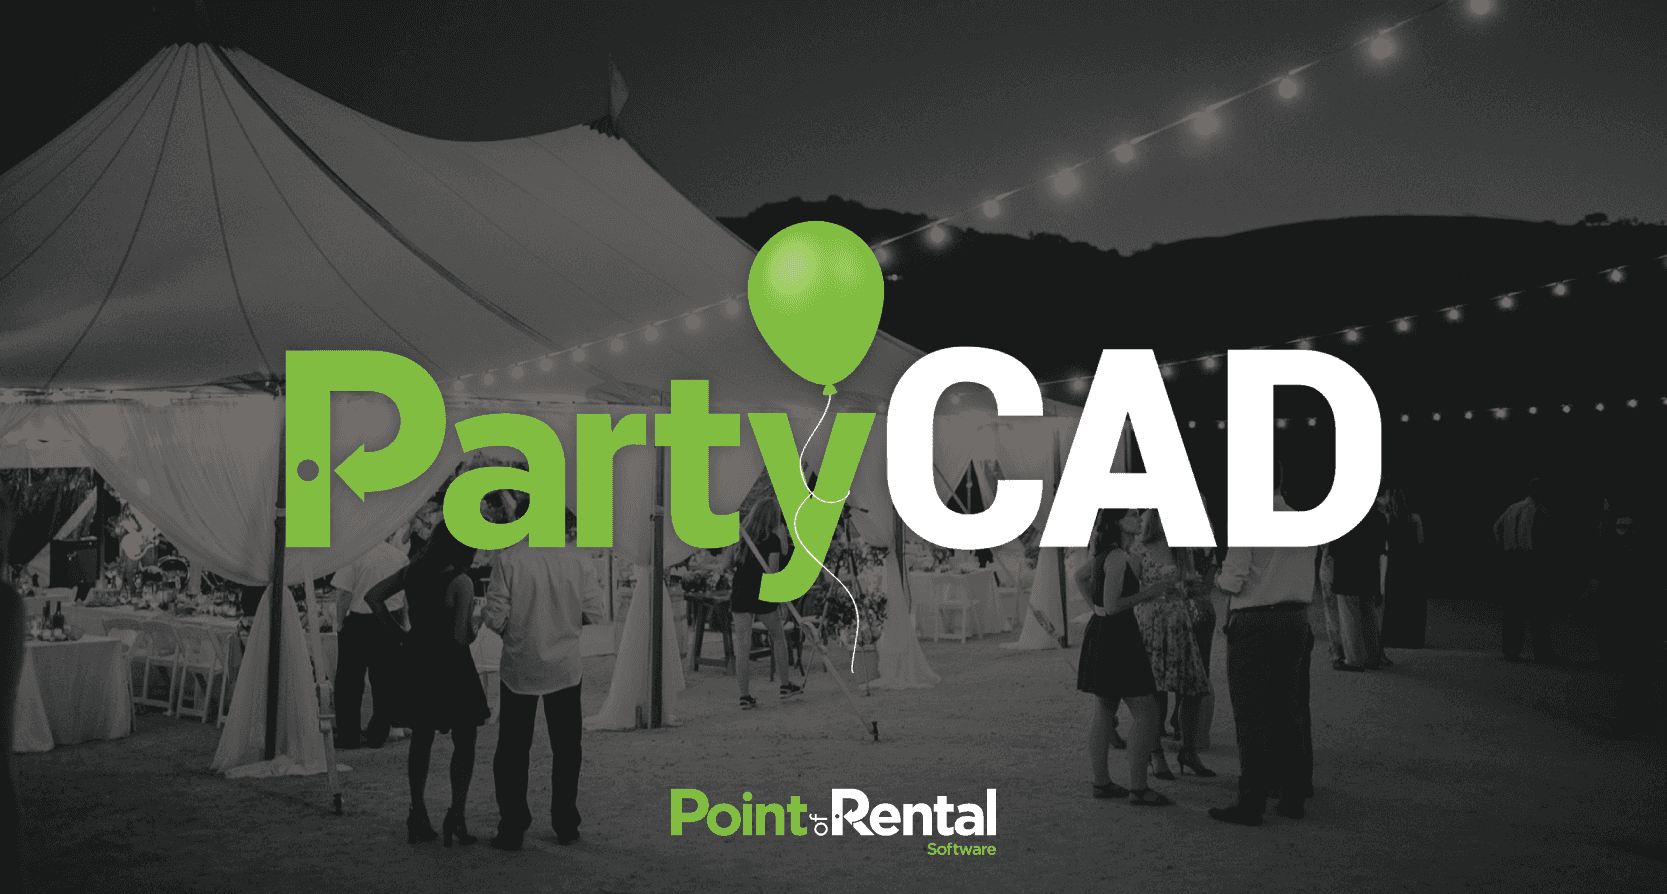 Point of Rental has acquired PartyCAD software.